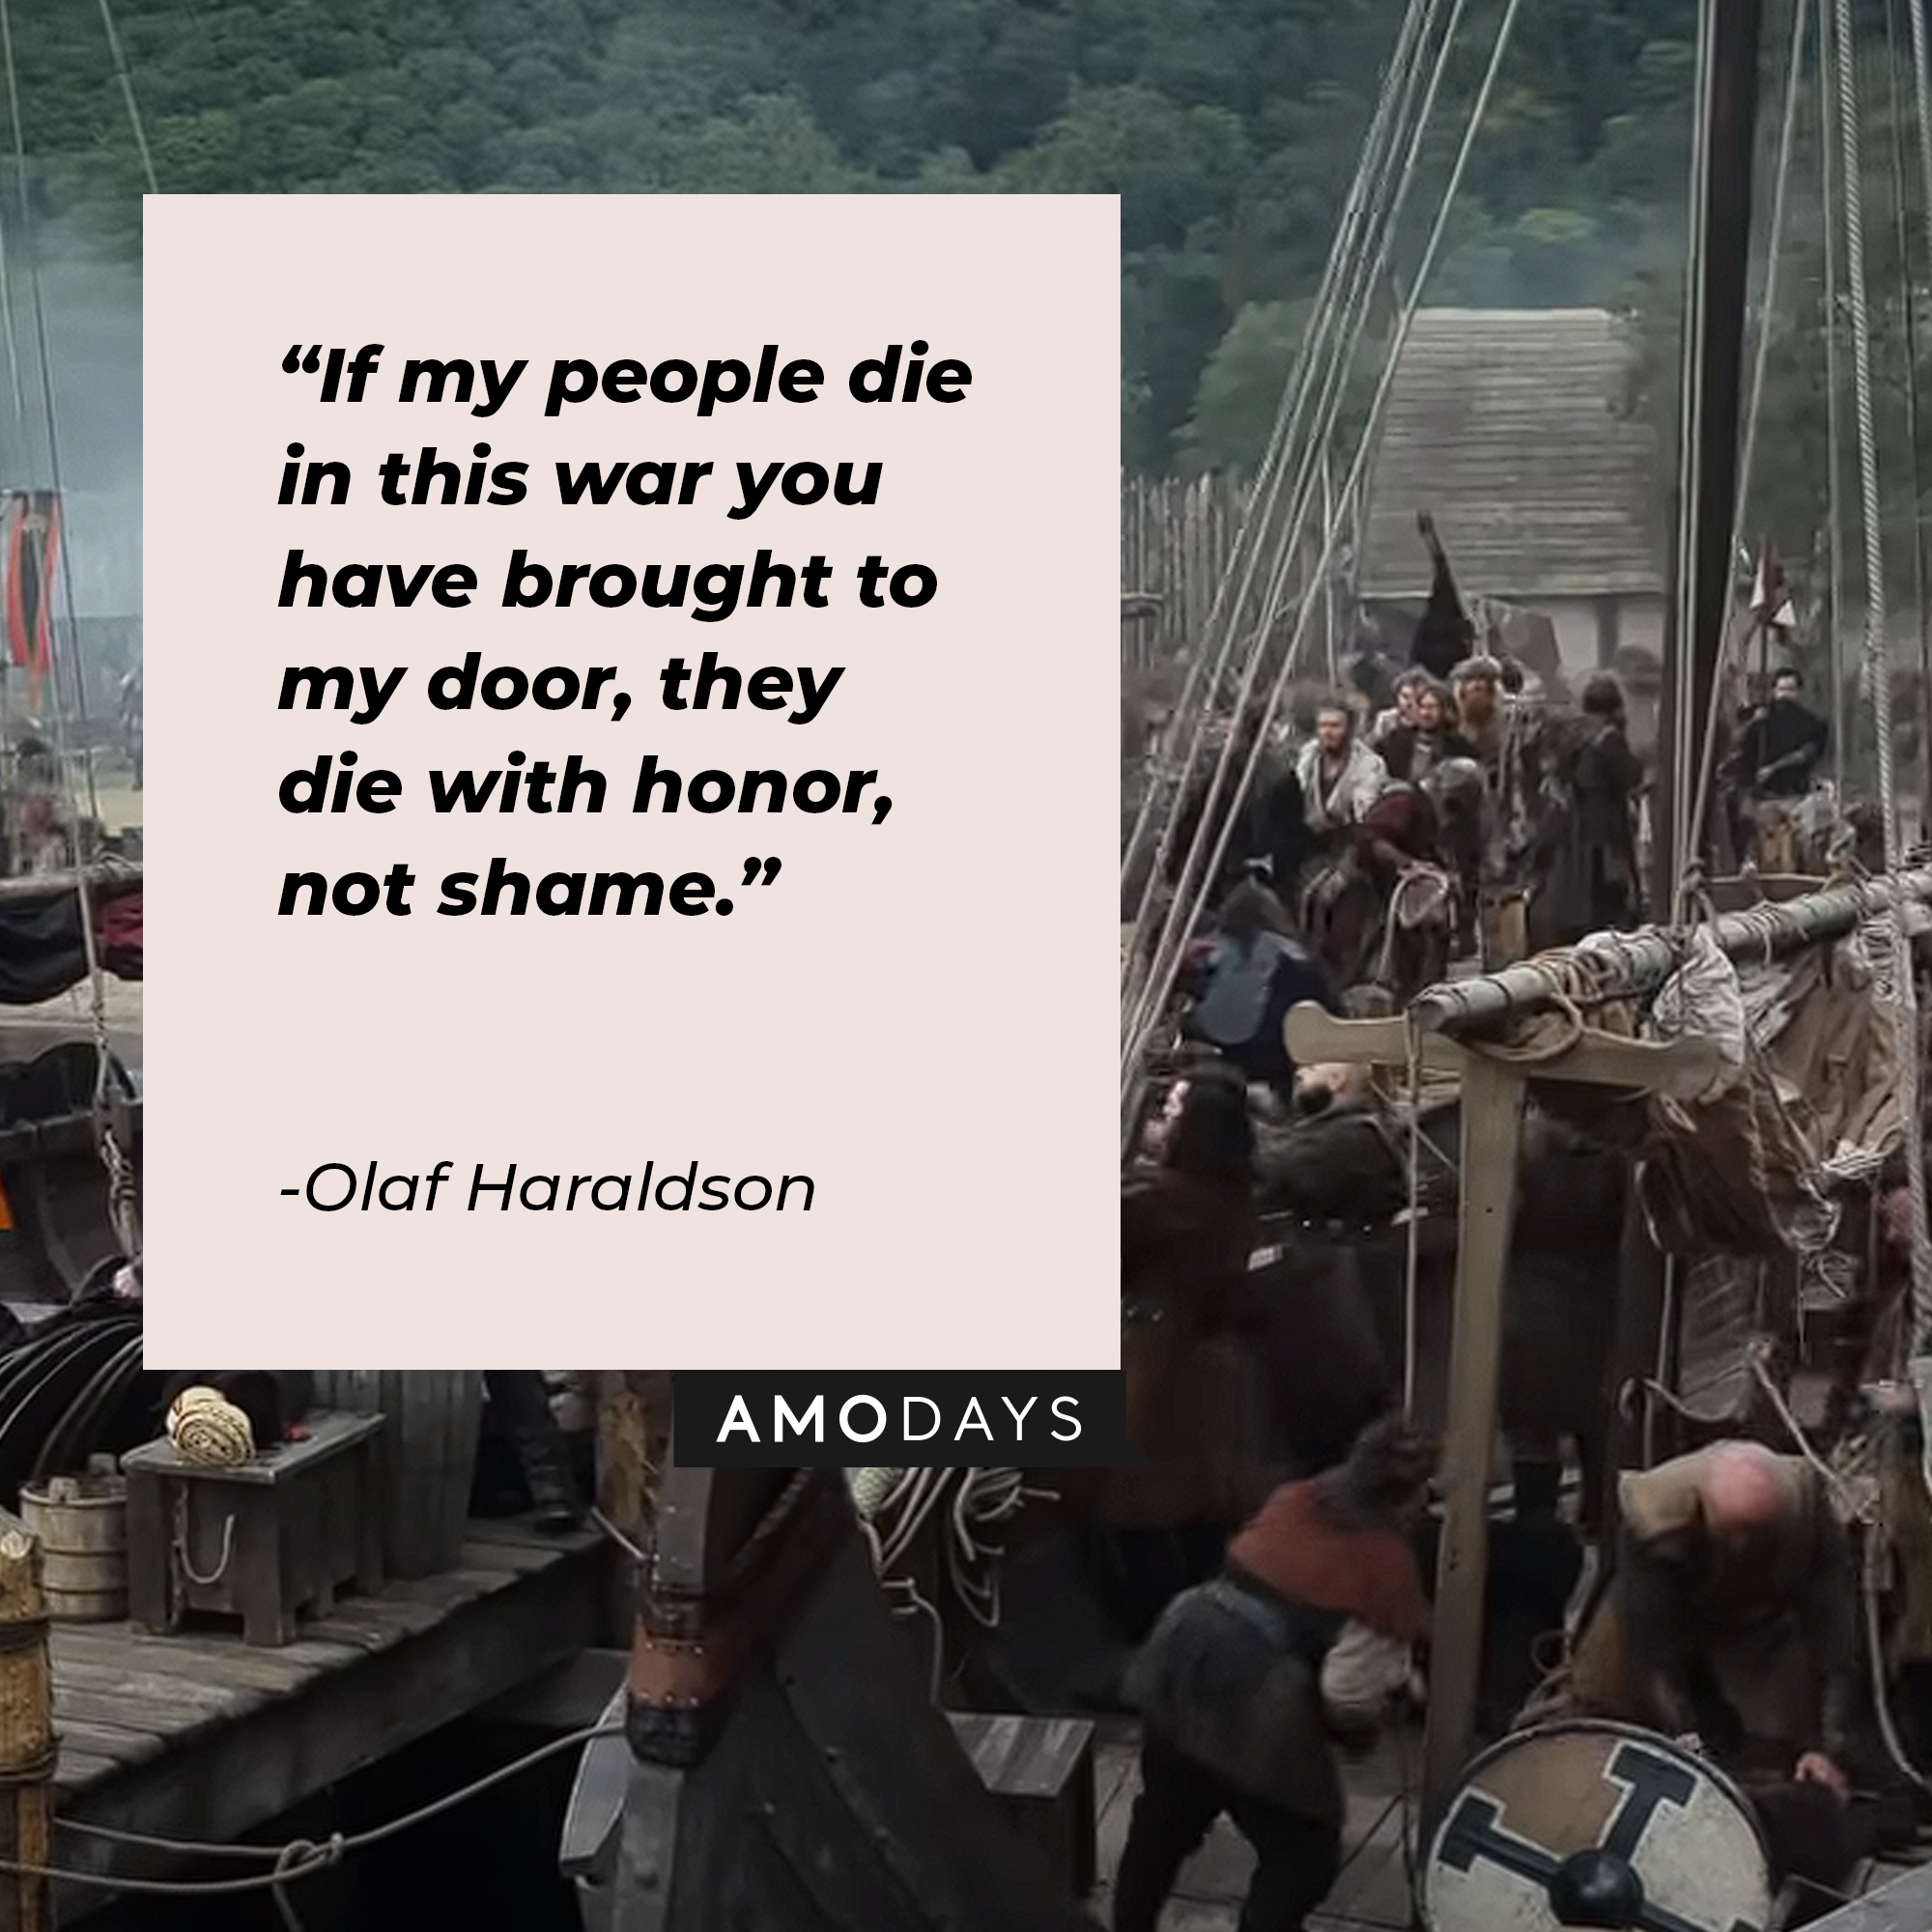 Olaf Haraldson's quote: "If my people die in this war you have brought to my door, they die with honor, not shame." | Image: youtube.com/Netflix